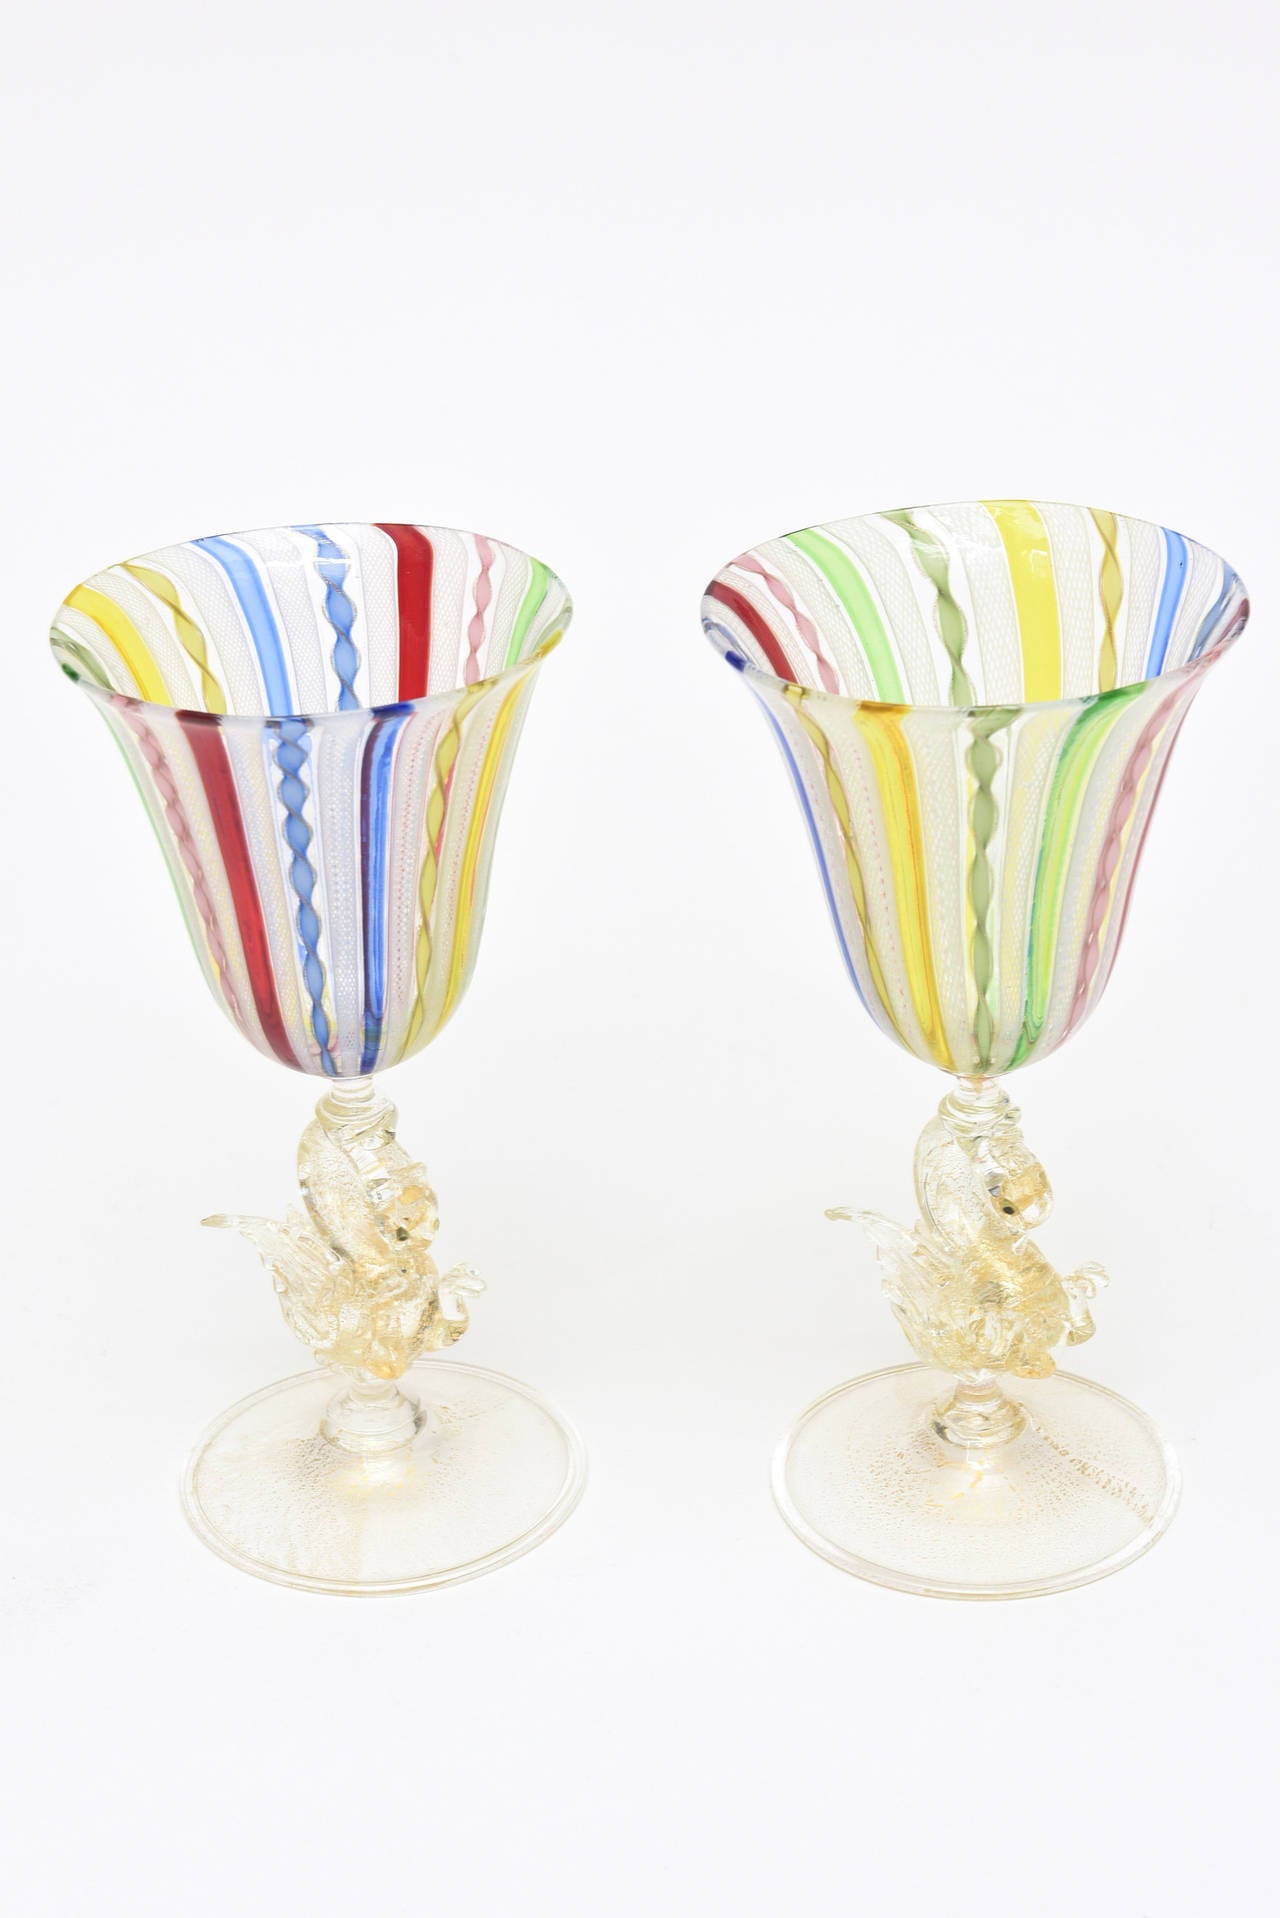 Pair of Early Venetian Glass Multicolored Latticino and Gold Aventurine Goblets 4